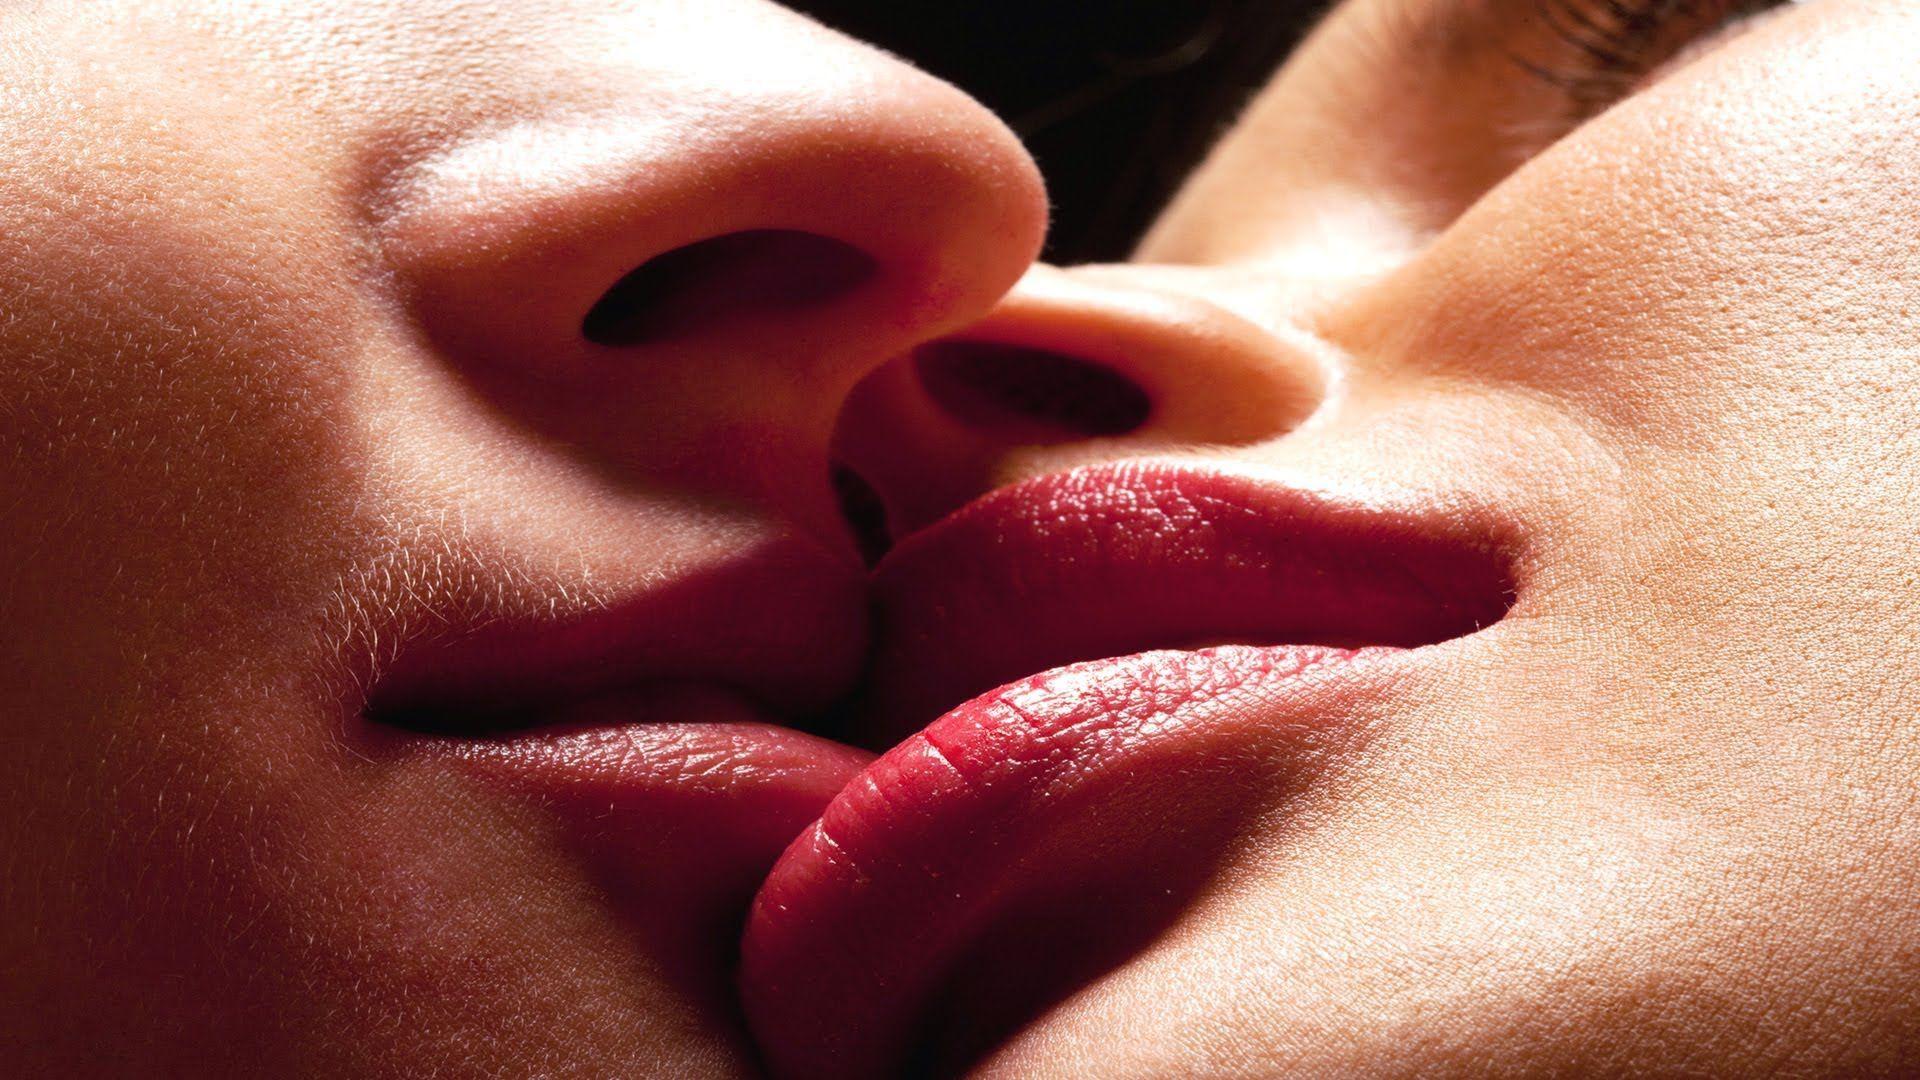 Hot Kiss Wallpaper Download free Candy Colors Lips Mobile